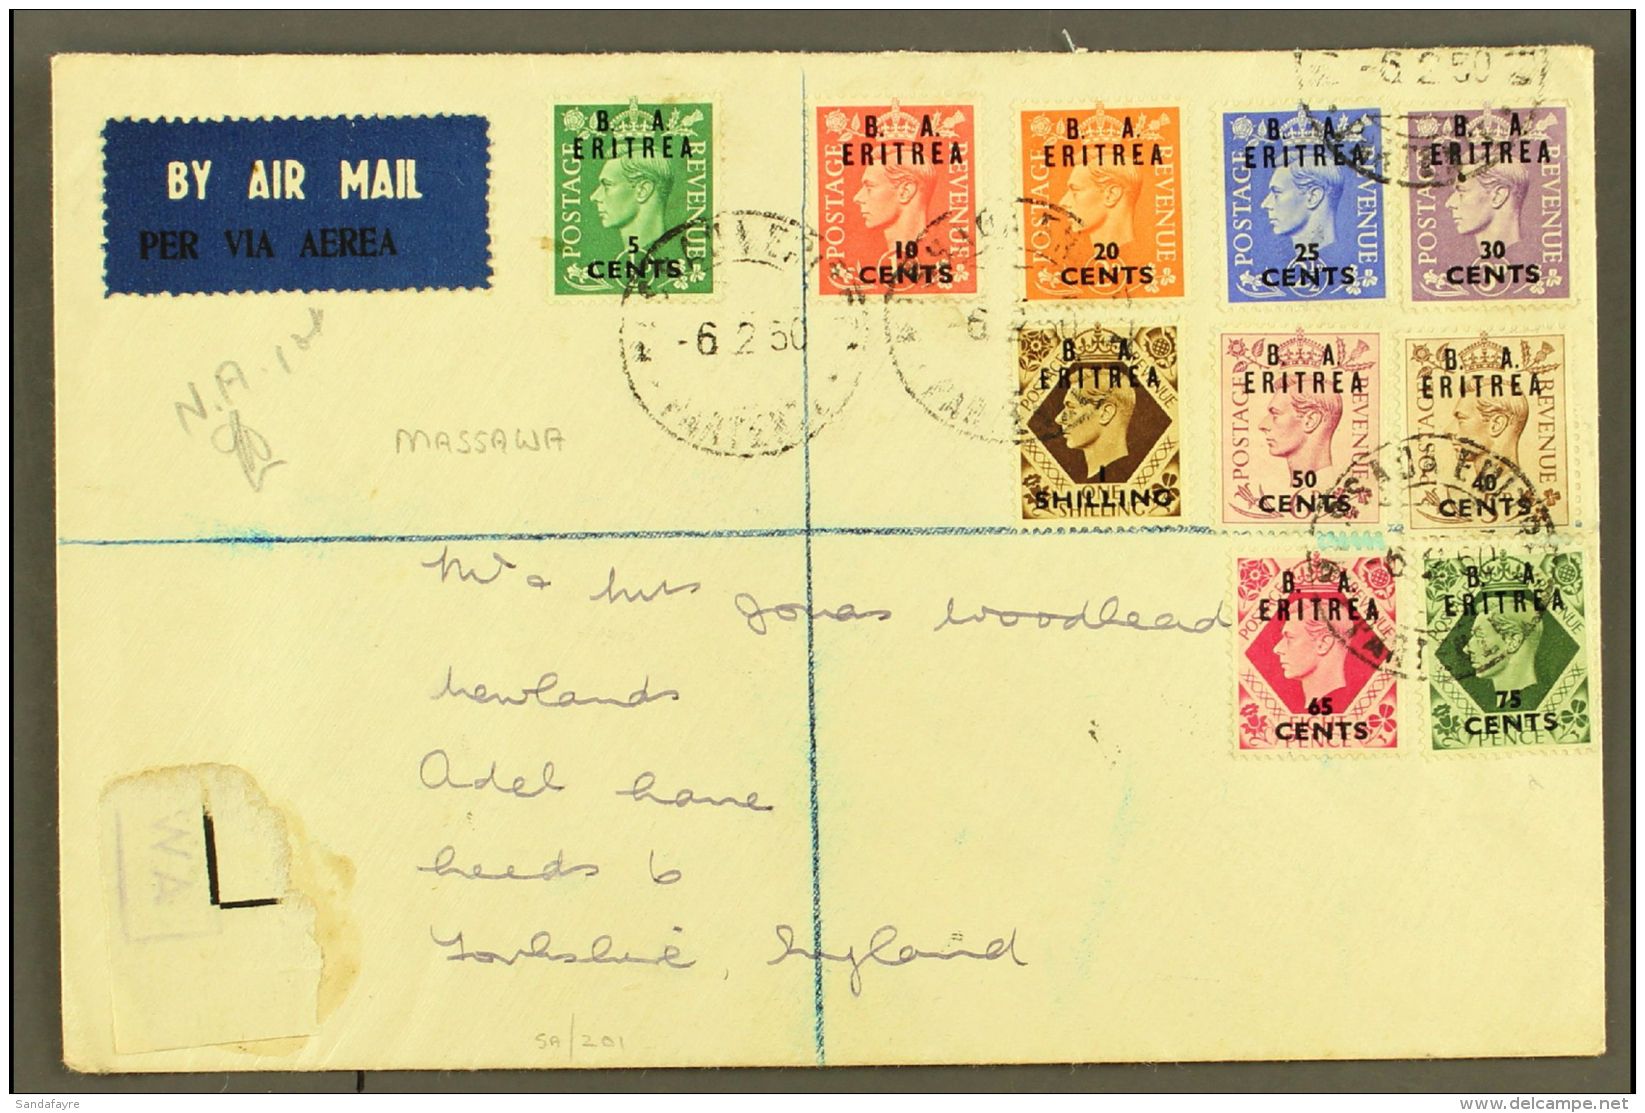 ERITREA 1950 Registered Airmail FIRST DAY Cover To England, Franked KGVI 5c On &frac12;d To 1s On 1s Complete "B.... - Africa Orientale Italiana